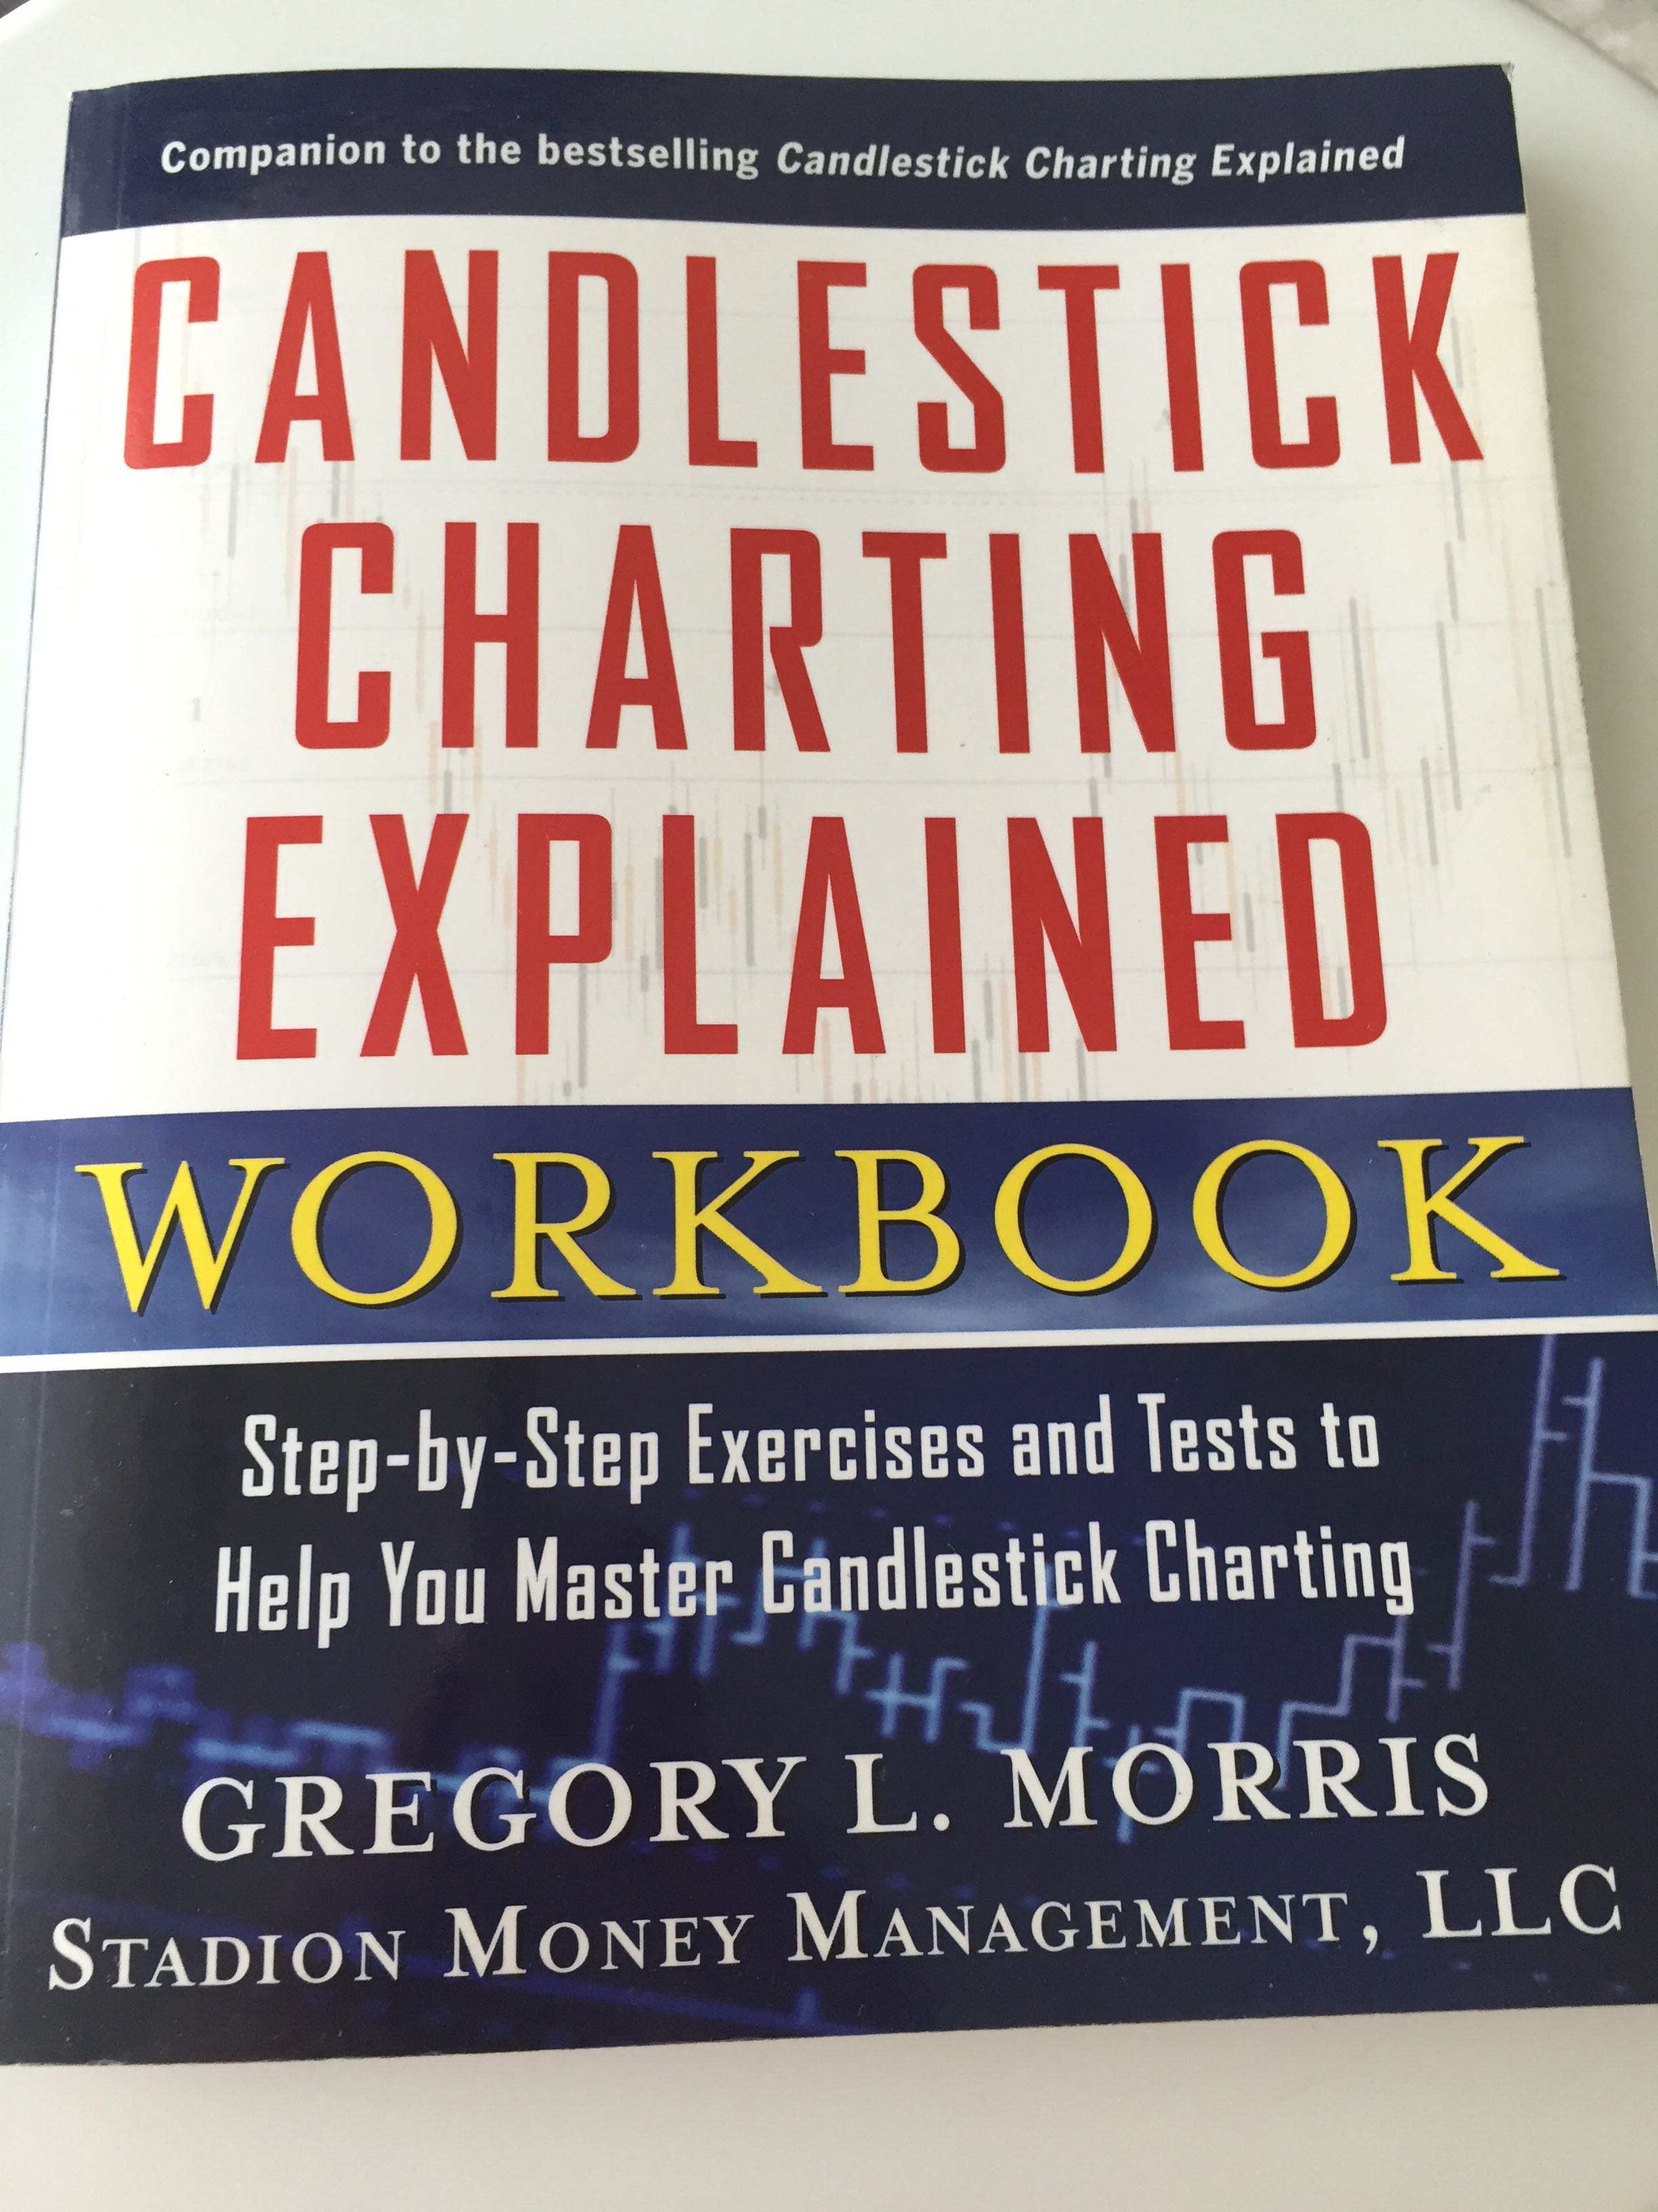 Candlestick Charting Explained